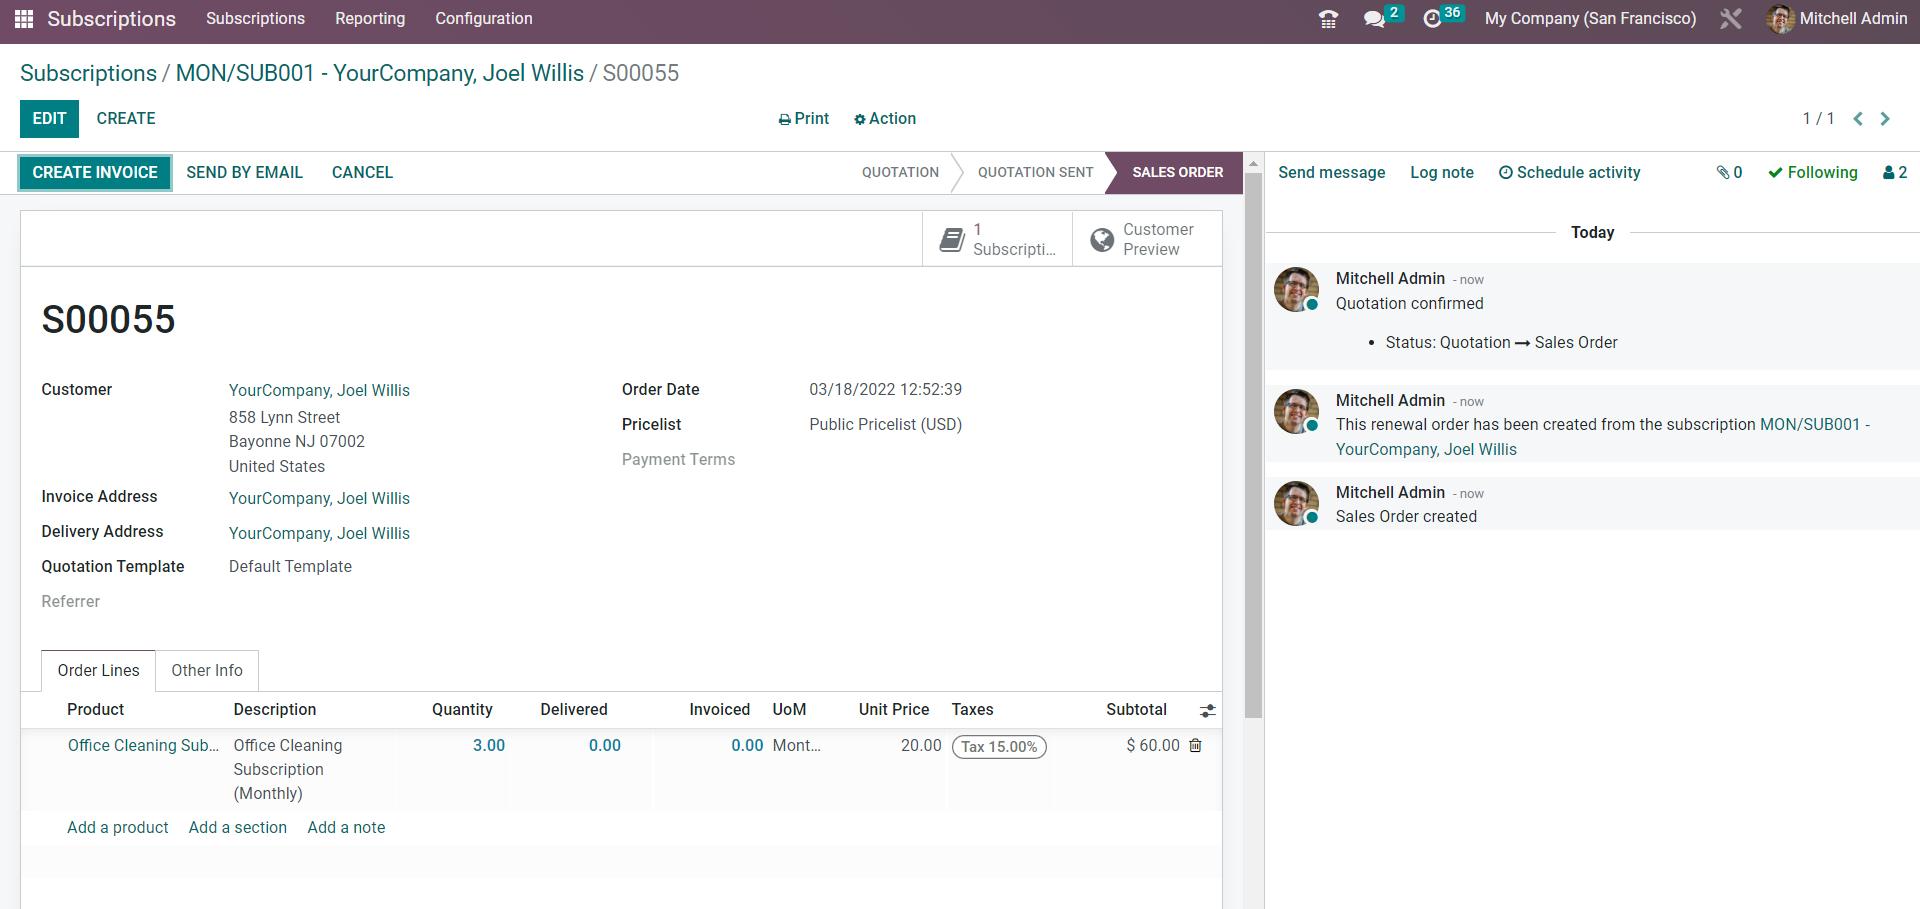 what-are-the-new-features-in-odoo-16